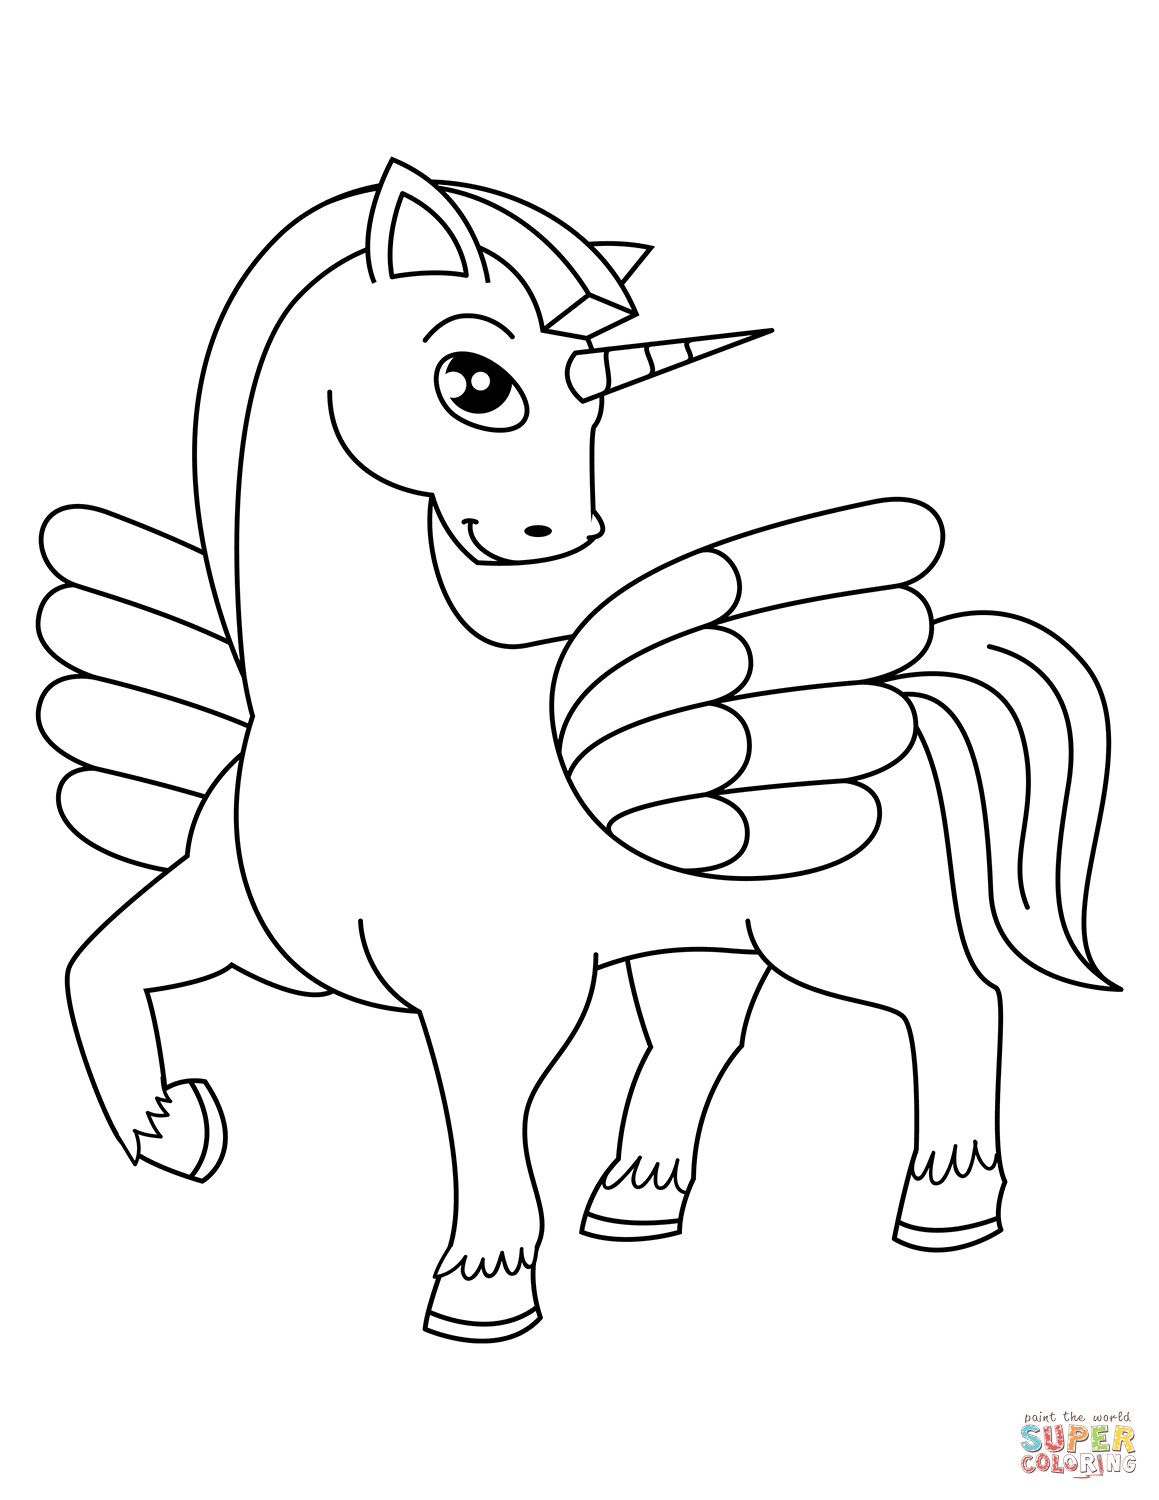 Unicorn Coloring Pages For Girls
 Cute Winged Unicorn coloring page